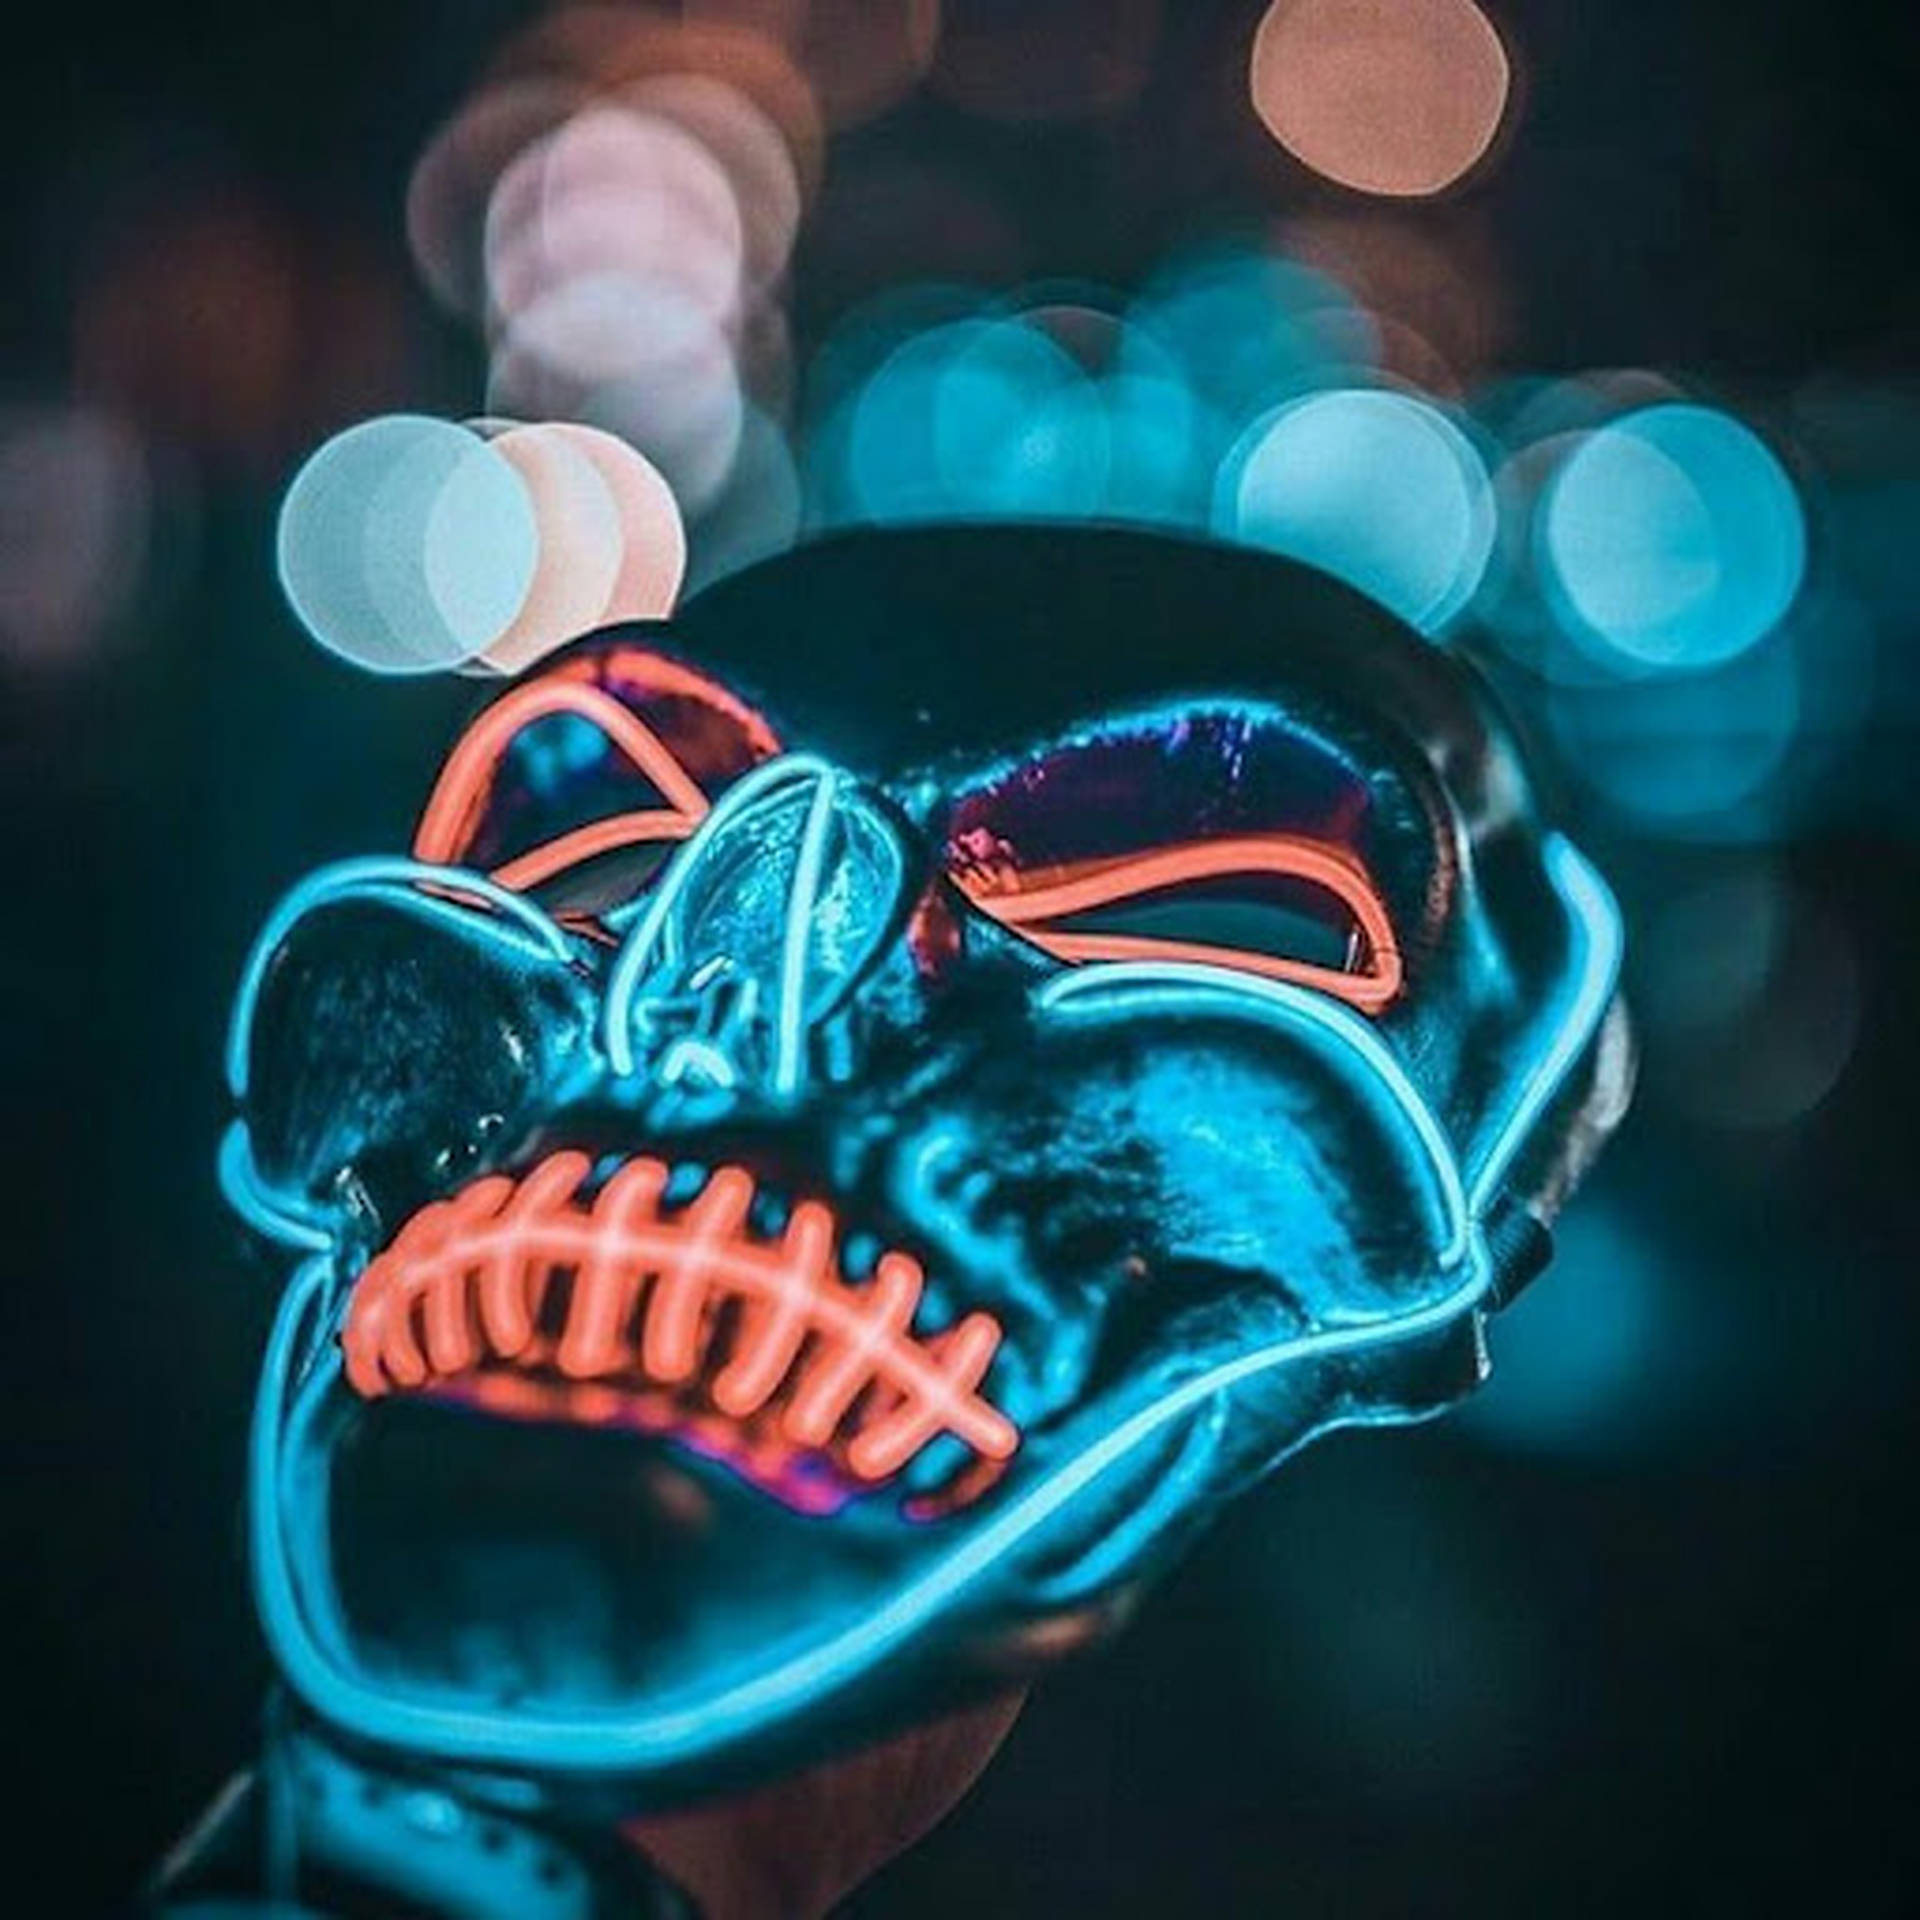 Purge Mask With LED Lights Wallpaper